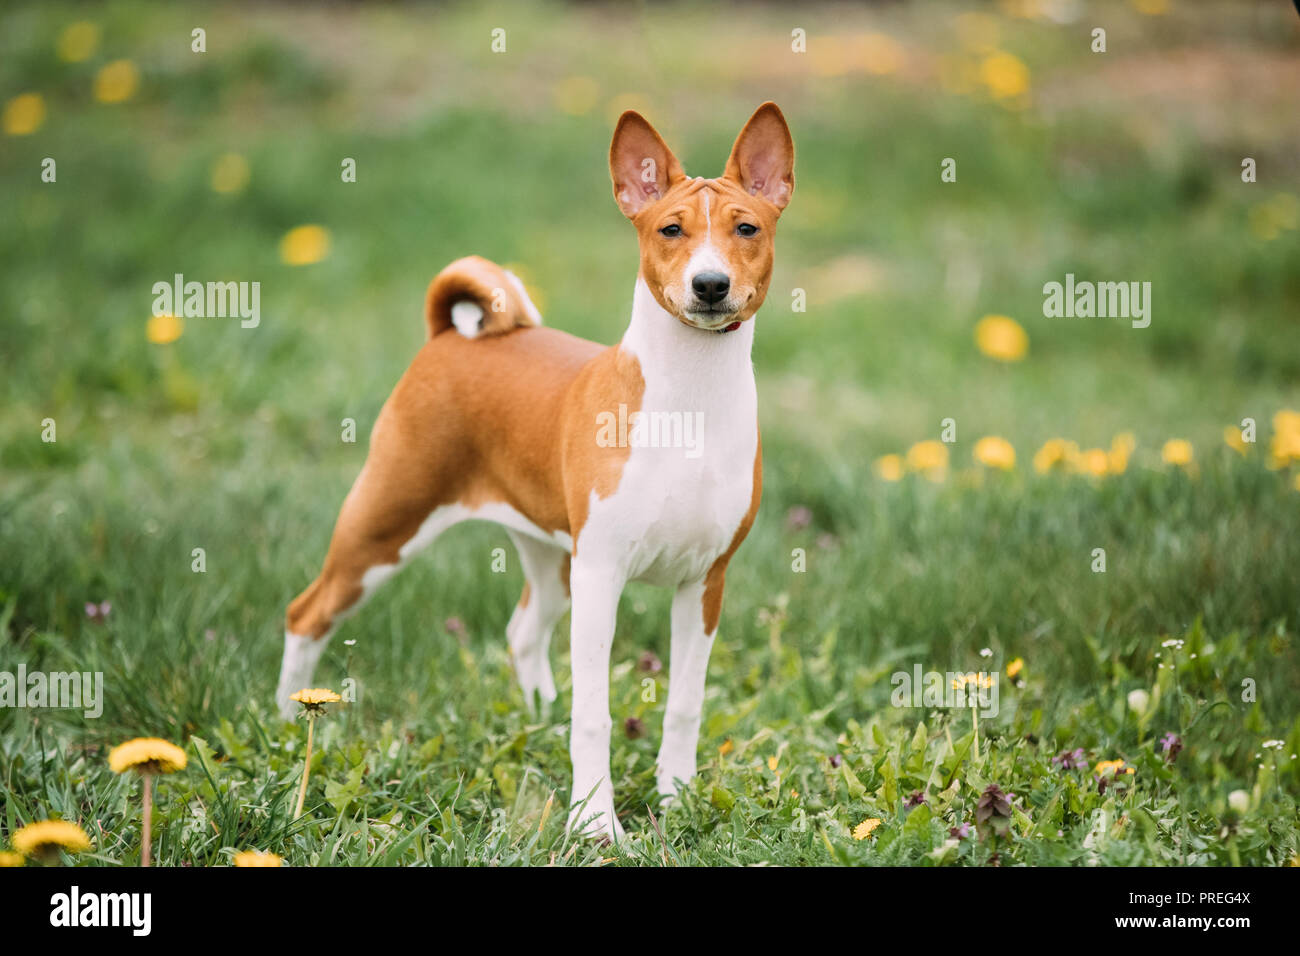 Basenji Kongo Terrier Dog. The Basenji Is A Breed Of Hunting Dog. It Was Bred From Stock That Originated In Central Africa. Stock Photo